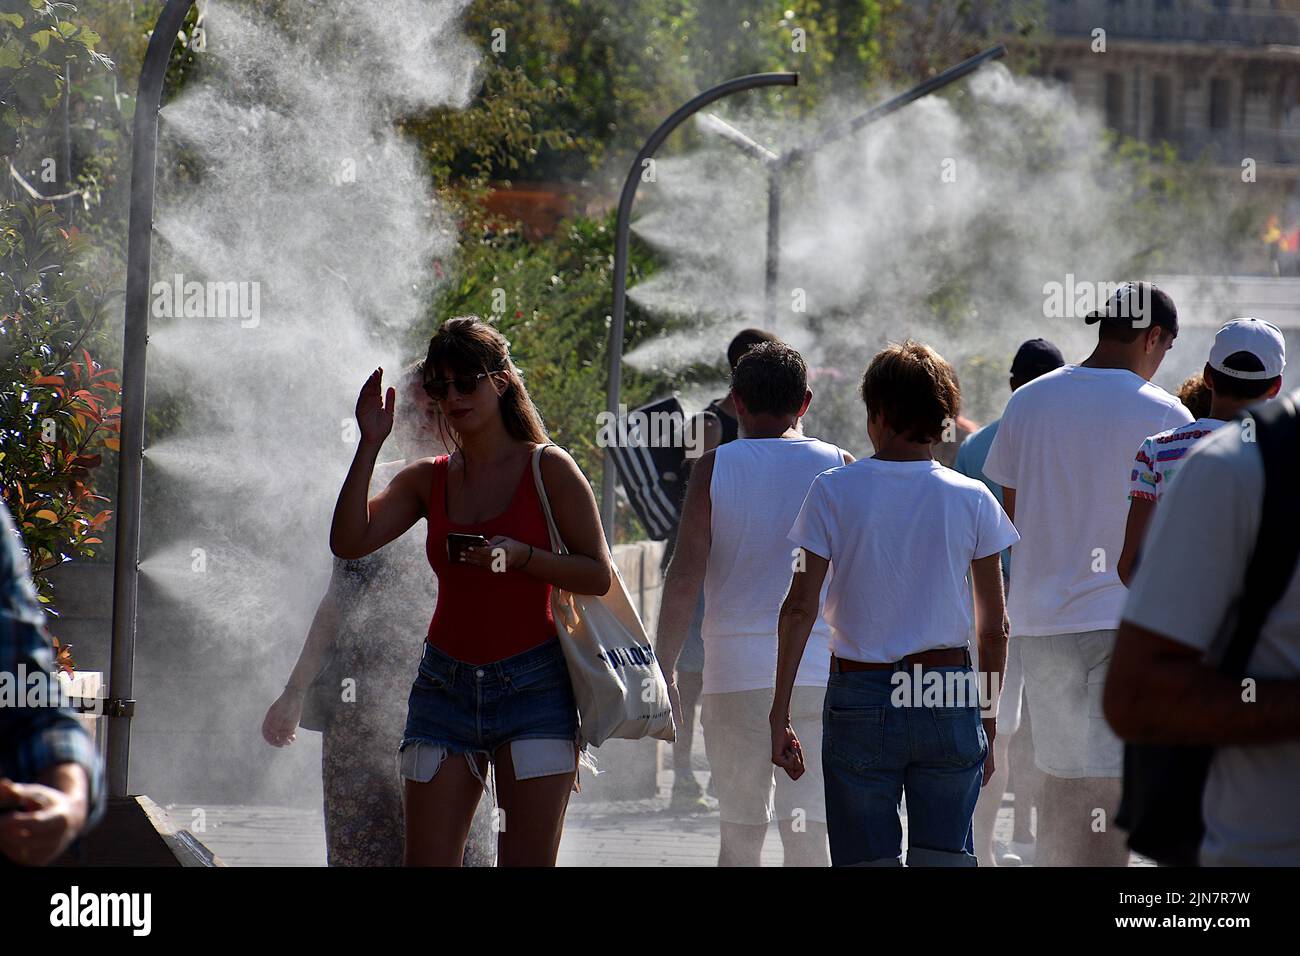 People pass under water sprayers in PACA. To cope with the high temperatures and a probable heat wave, the City of Marseille has installed misters on the quays of the Old Port so that passersby can cool off. Stock Photo